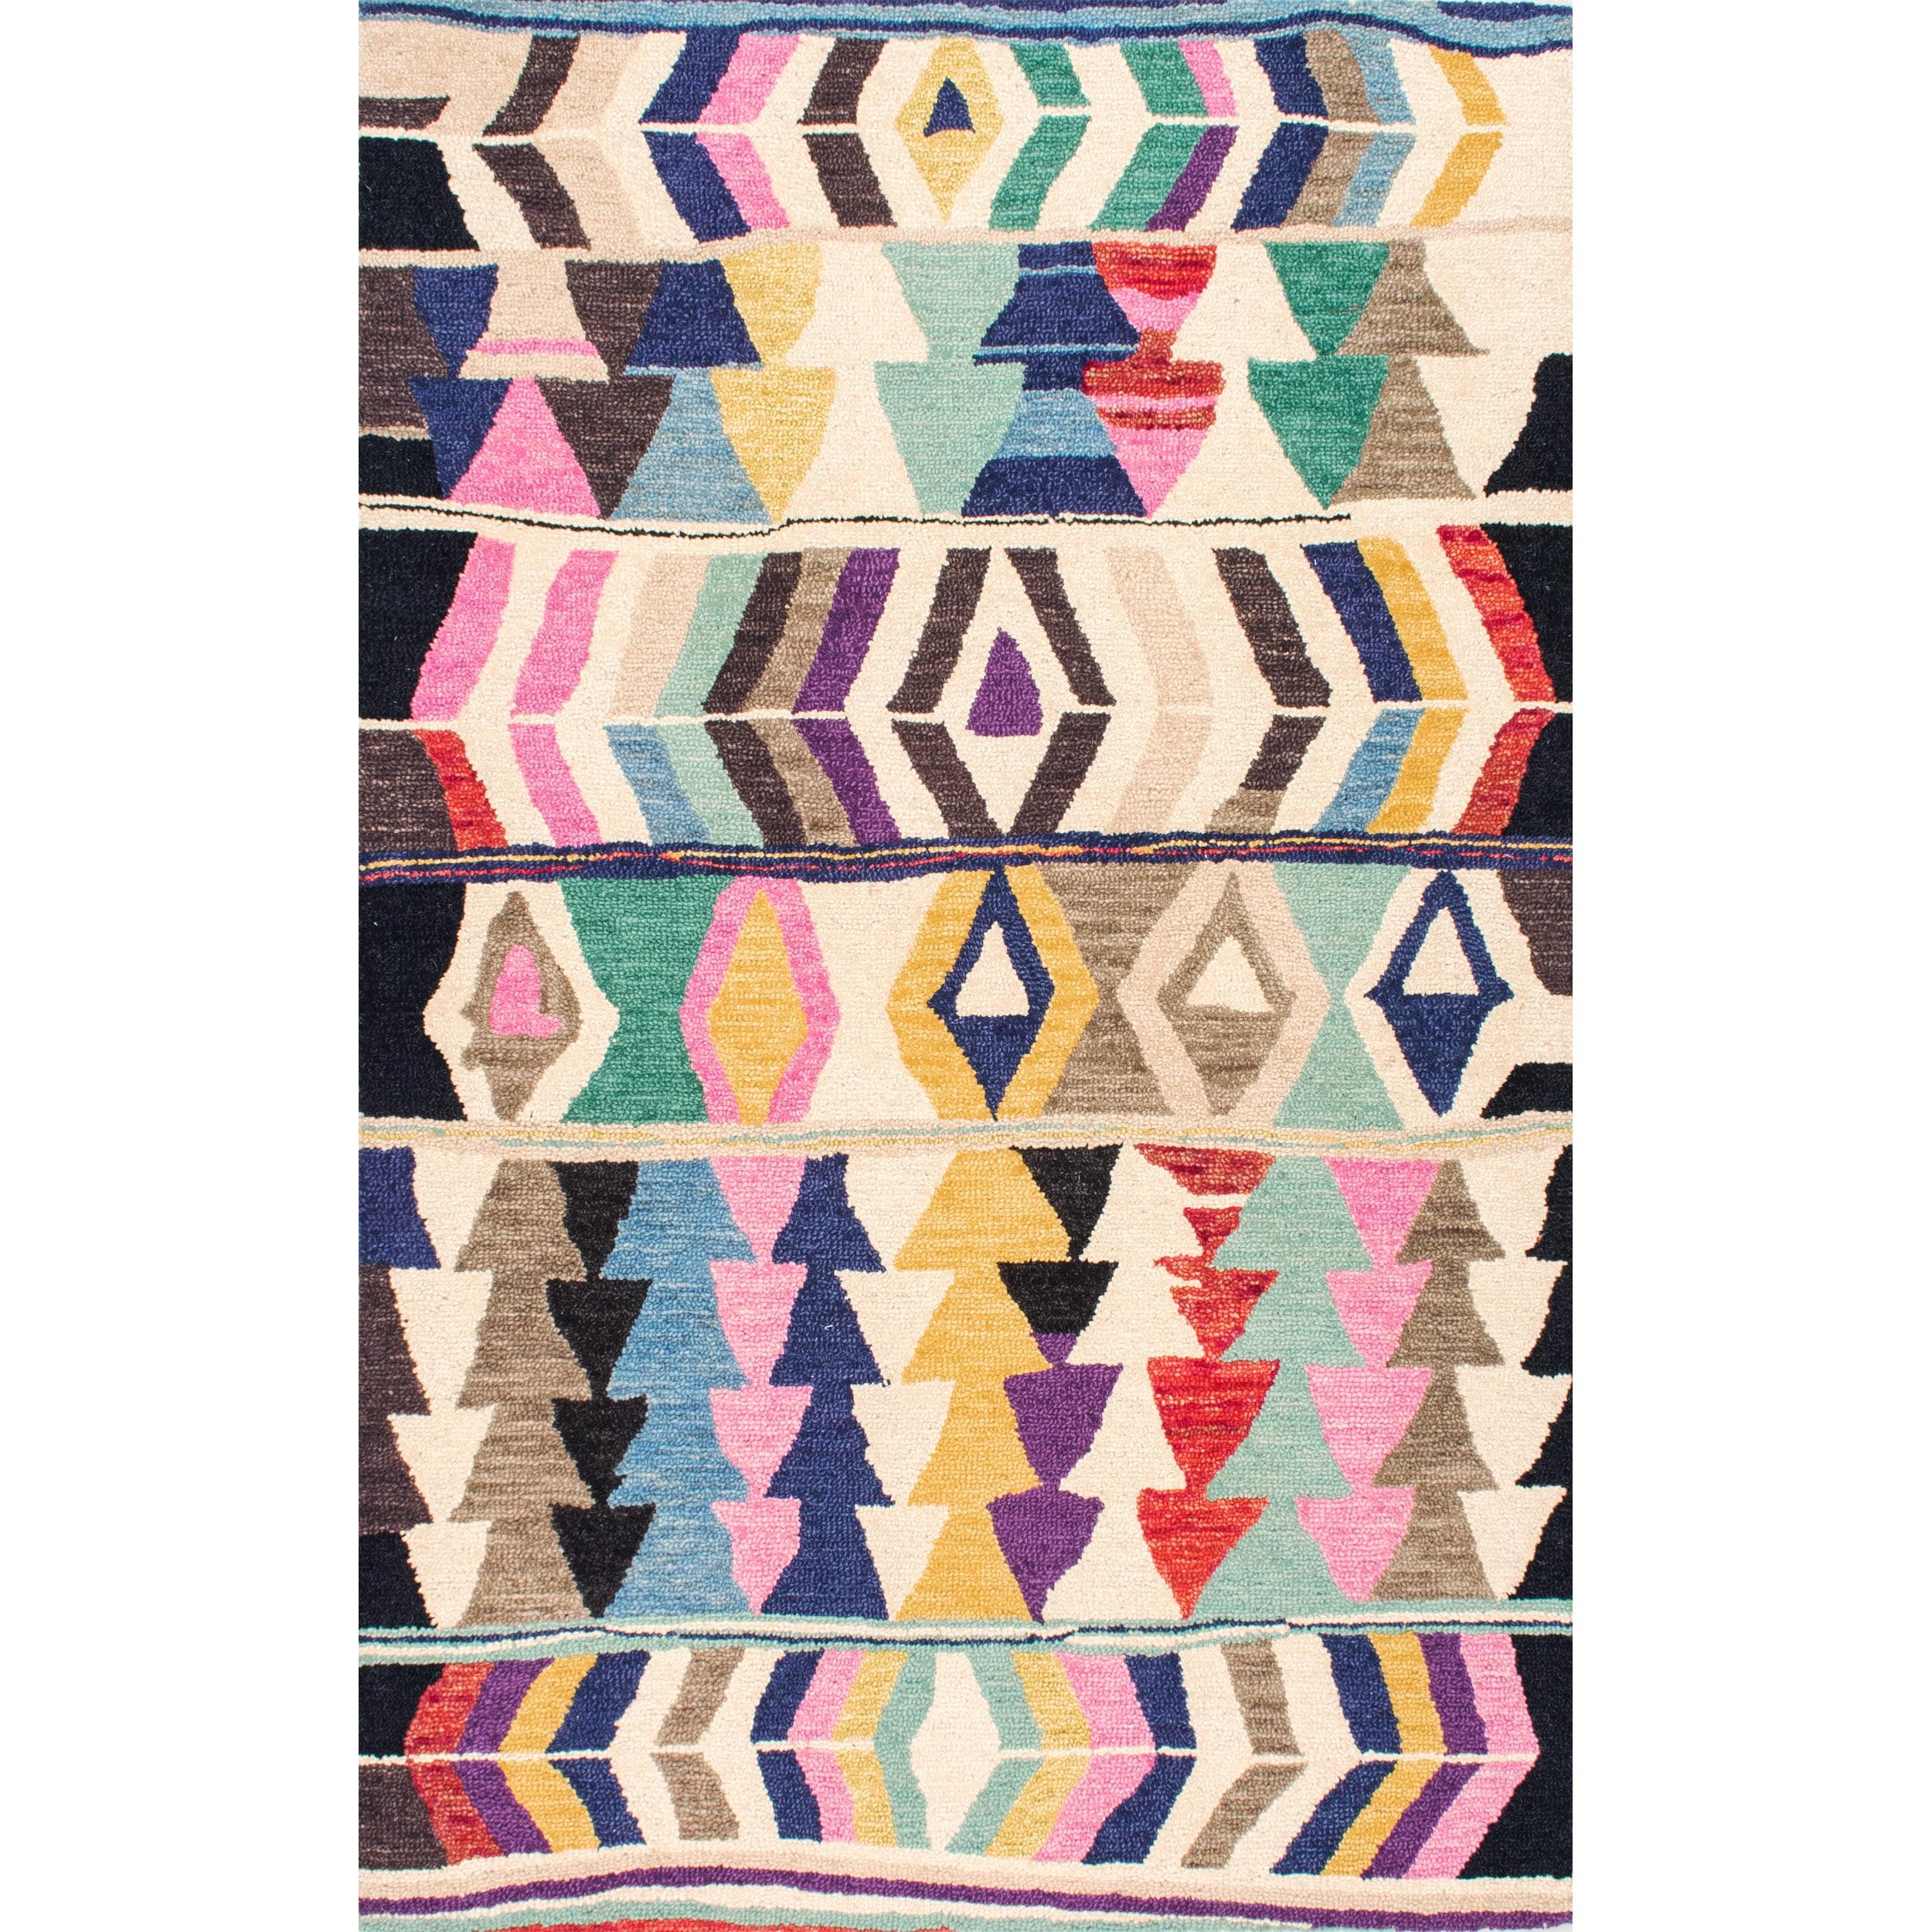 Handmade Multicolor Wool Geometric Tufted Accent Rug, 3' x 5'